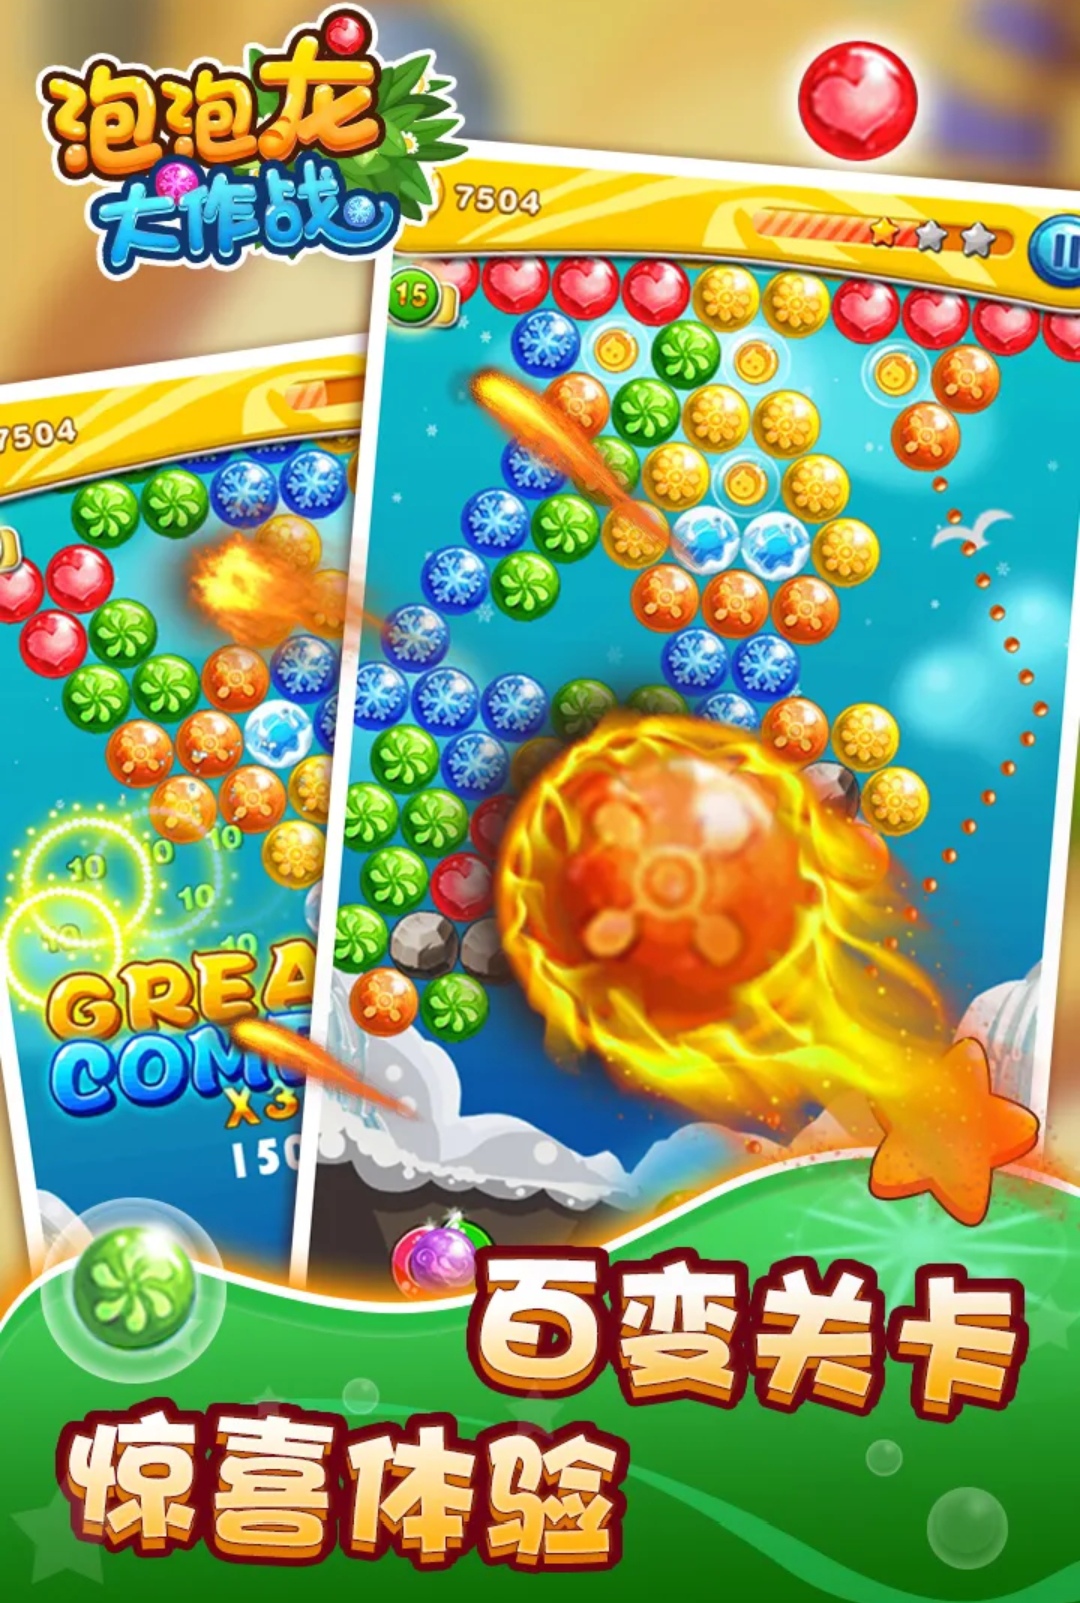  Download and share of Bubble Dragon battle